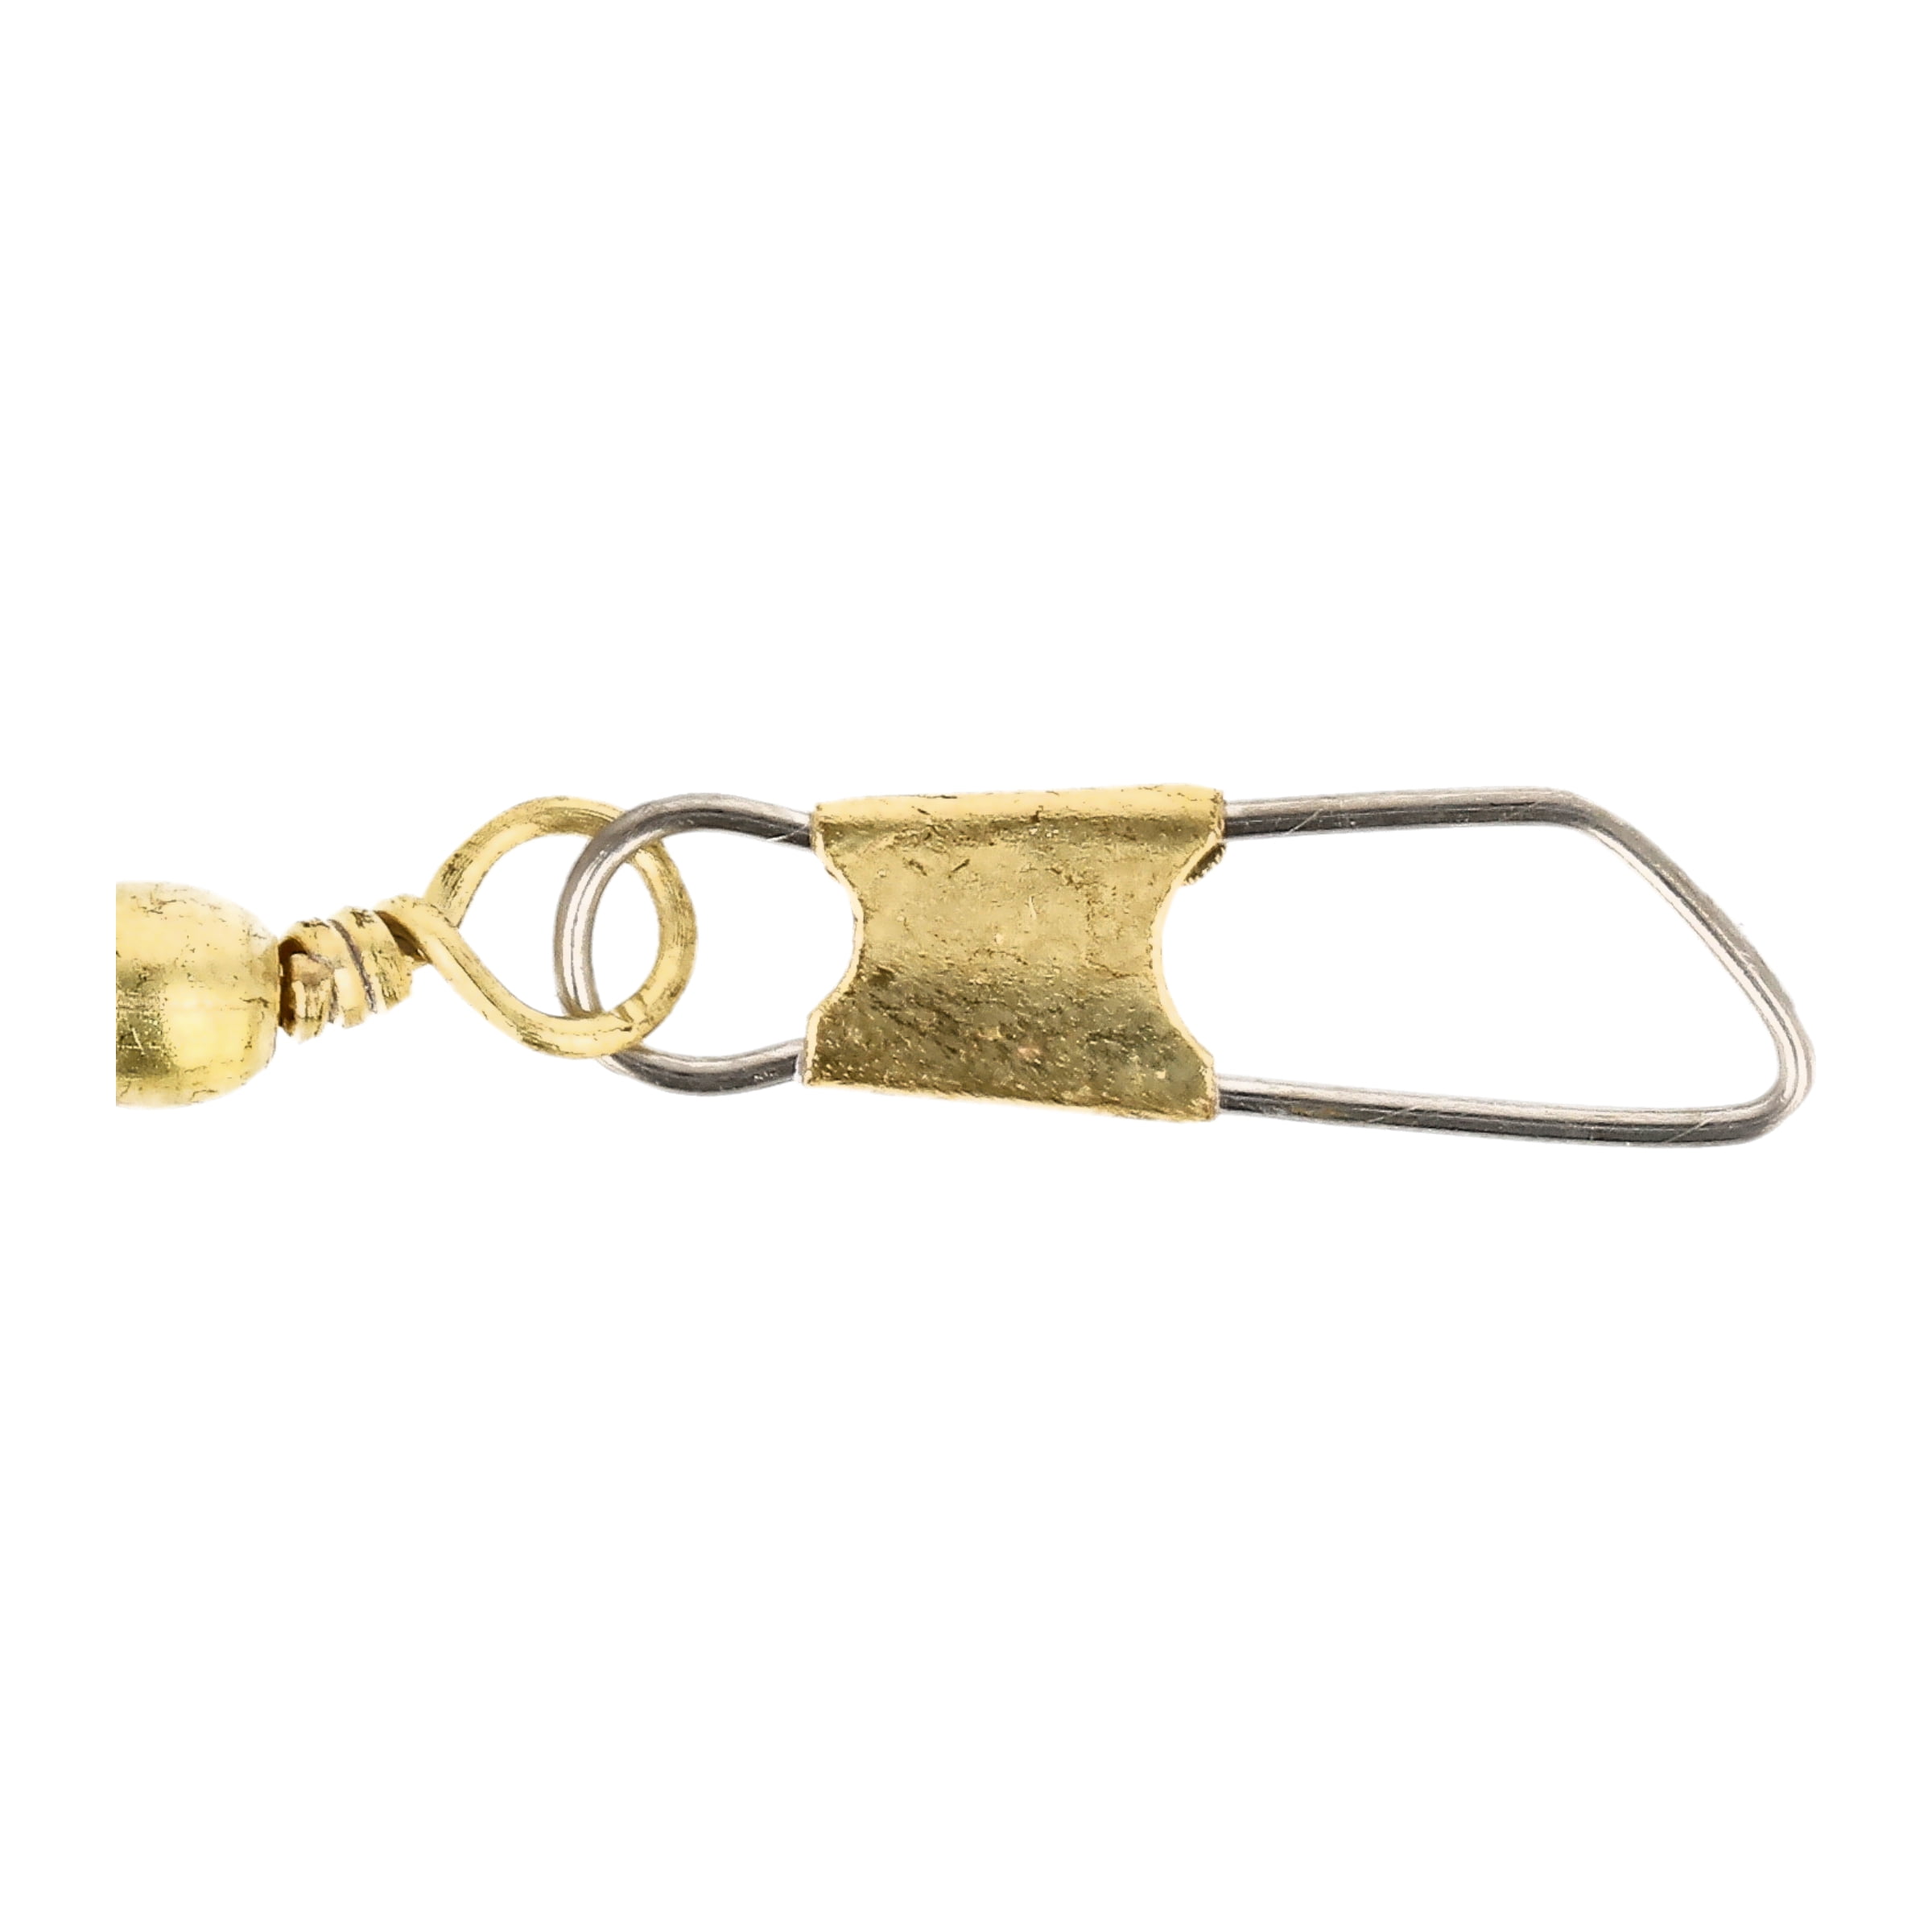 Eagle Claw Barrel Swivel with Safety Snap, Brass, Size 10, 12 Pack